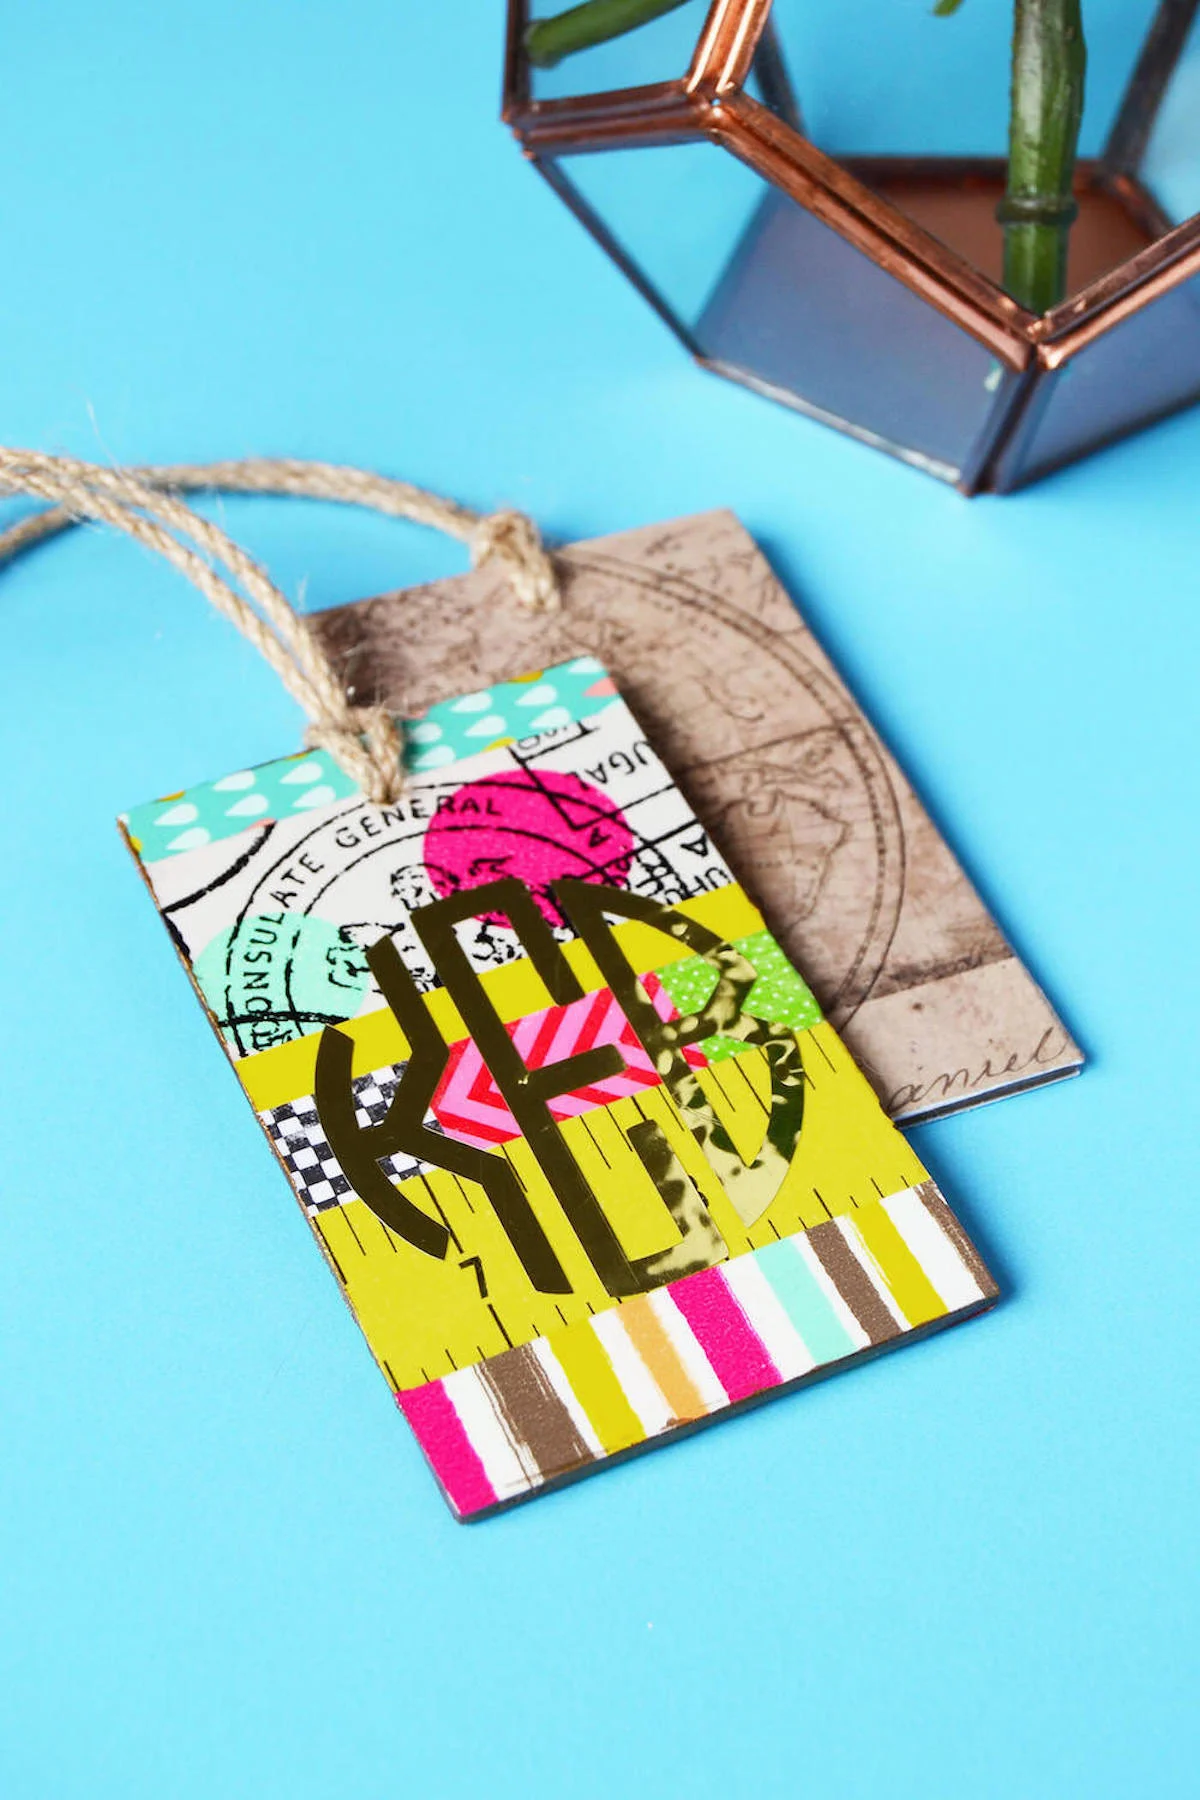 How to Make Luggage Tags 